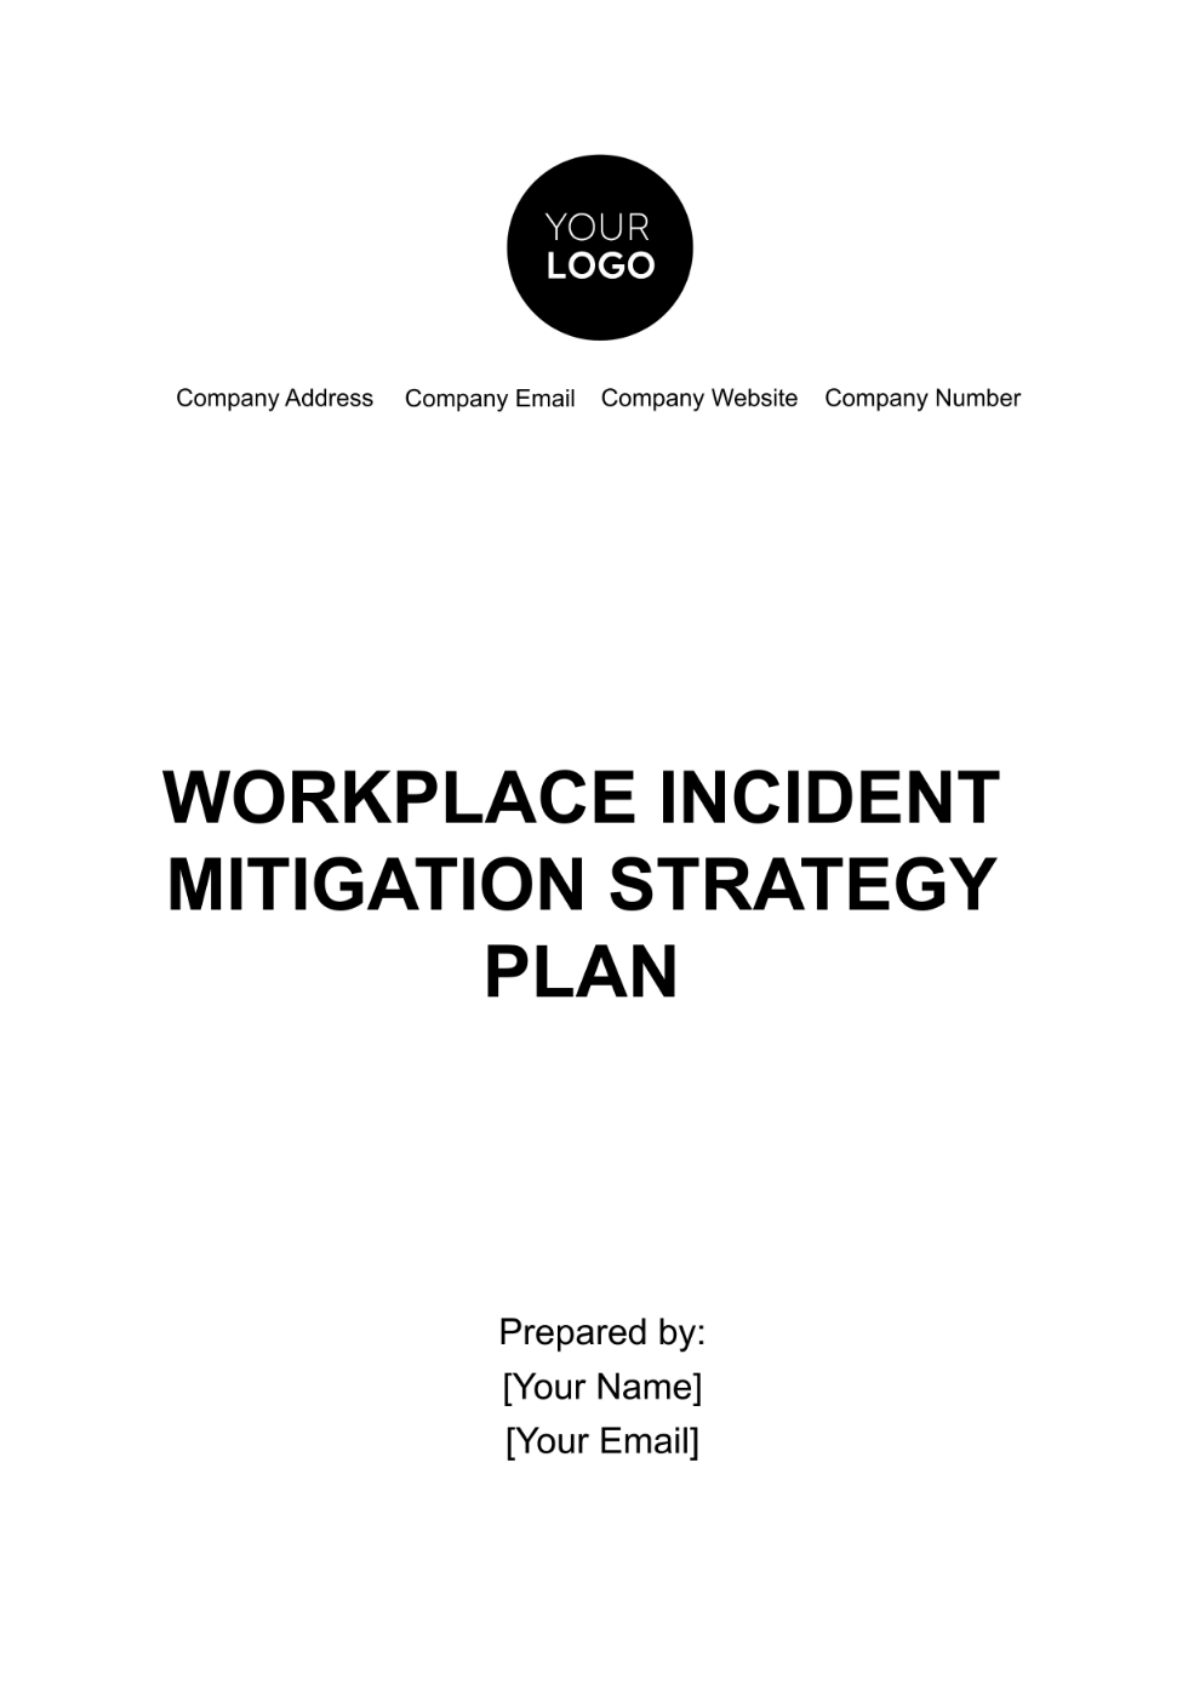 Workplace Incident Mitigation Strategy Plan Template